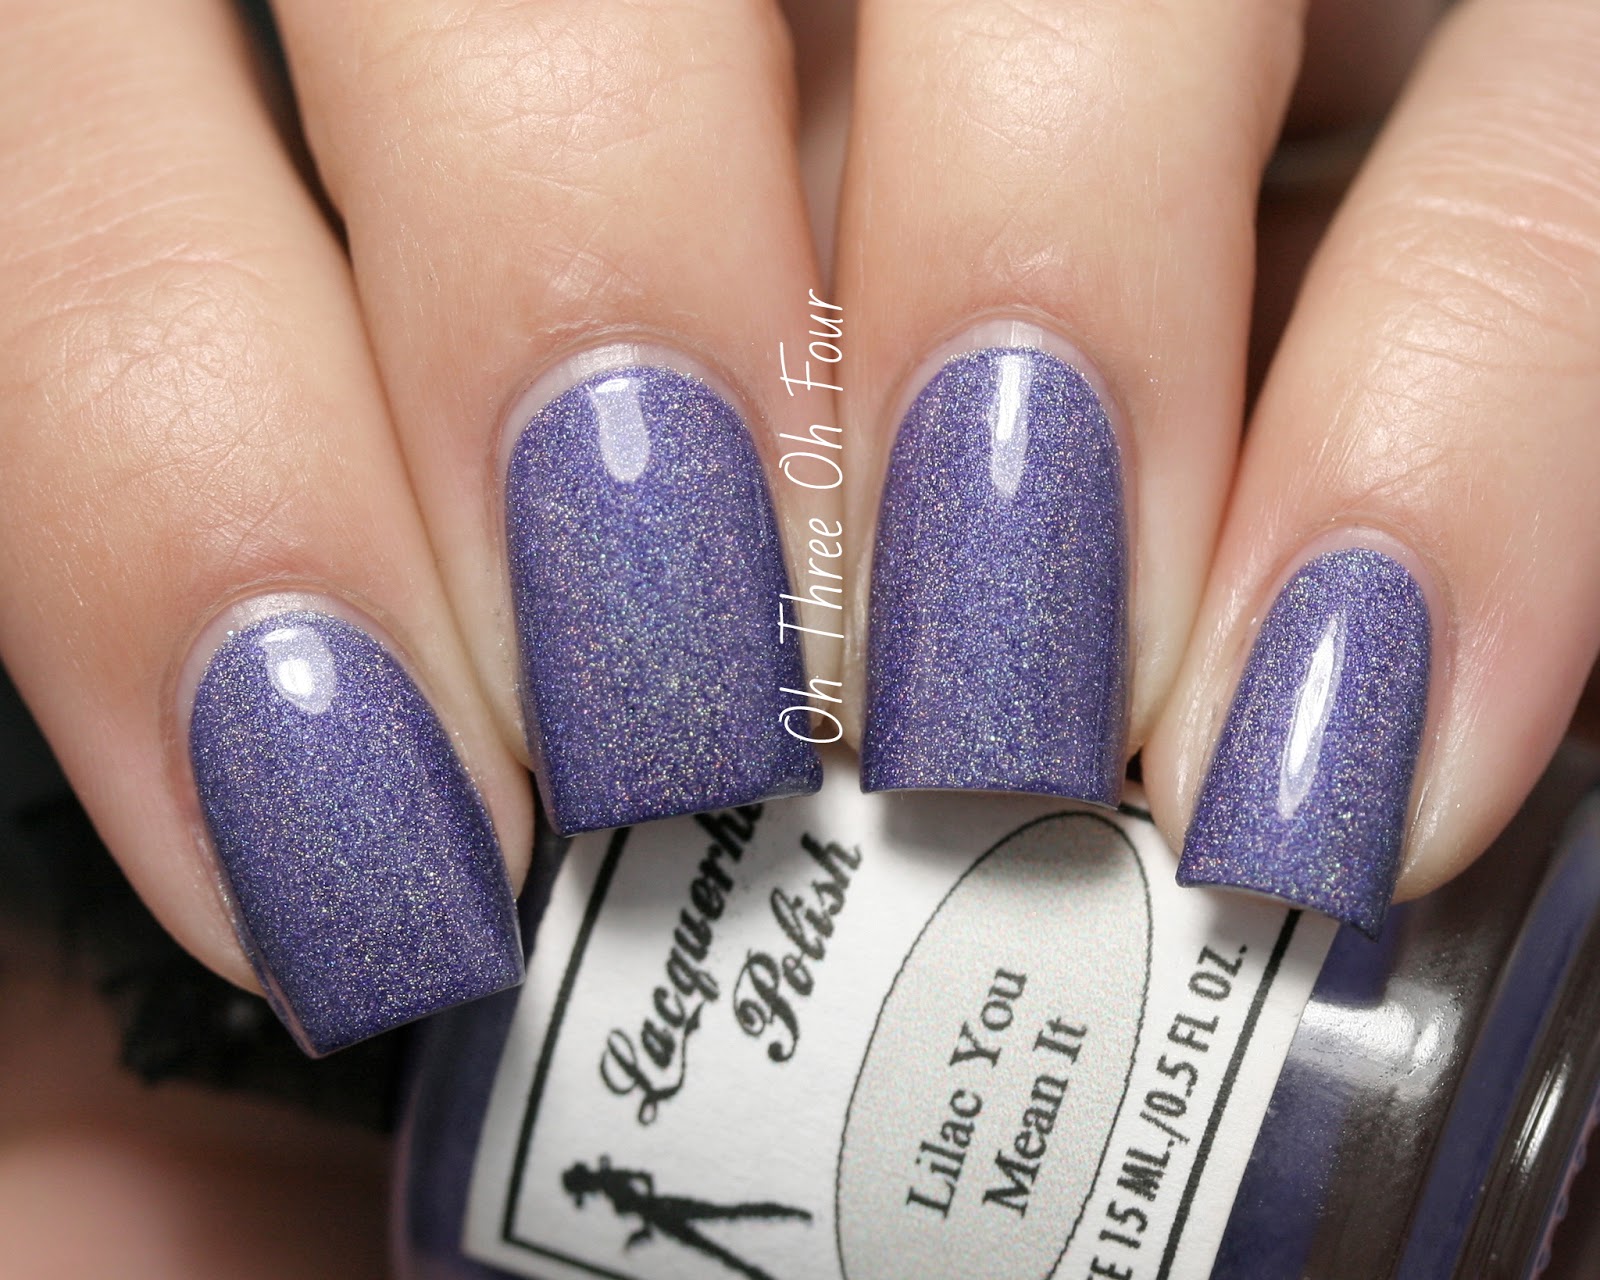 Lacquerhead Polish Lilac You Mean It Swatch